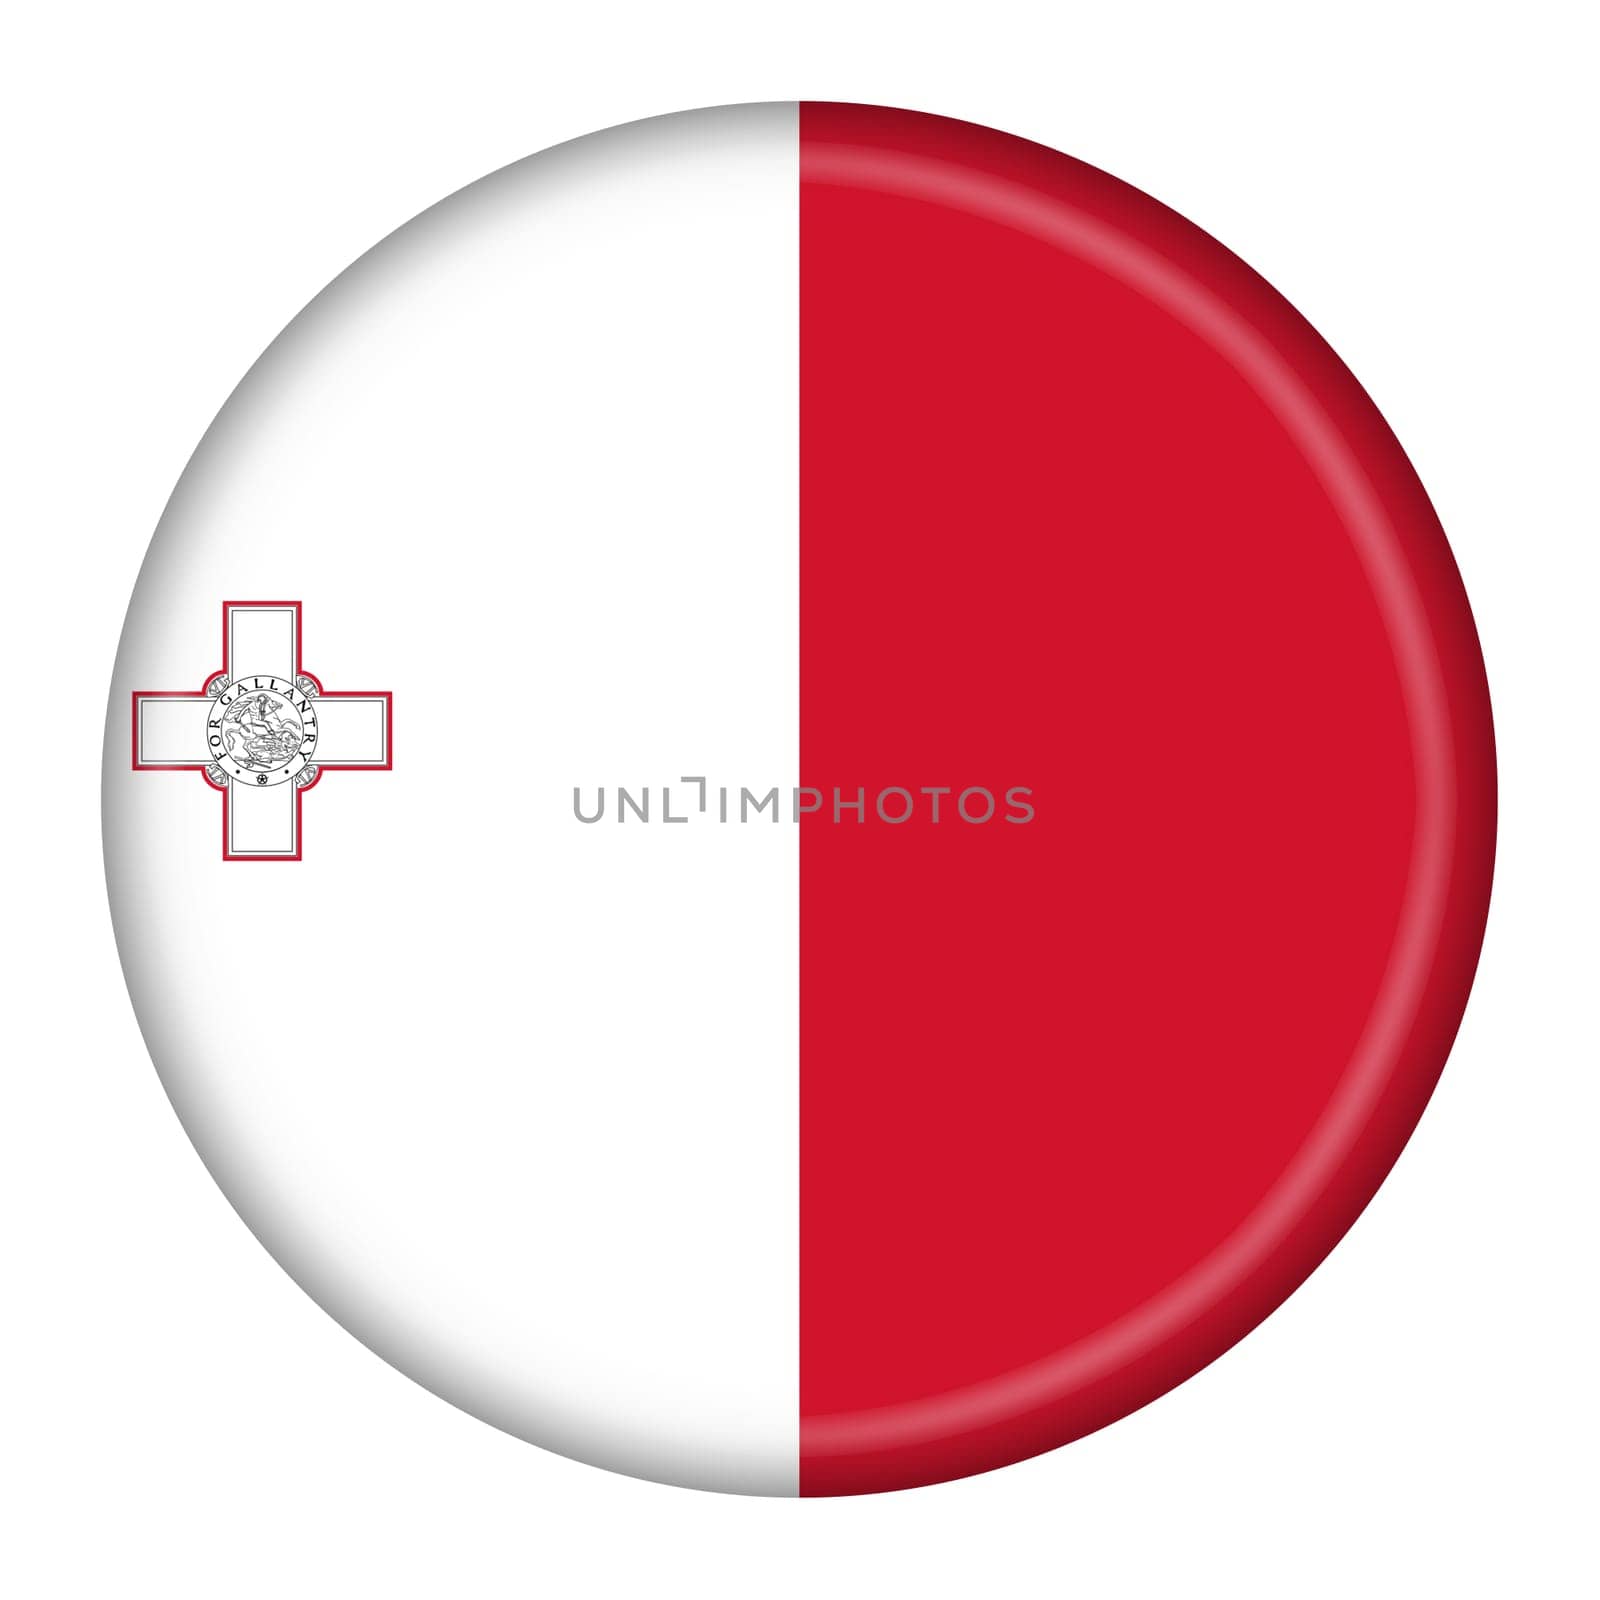 A Malta flag button 3d illustration with clipping path